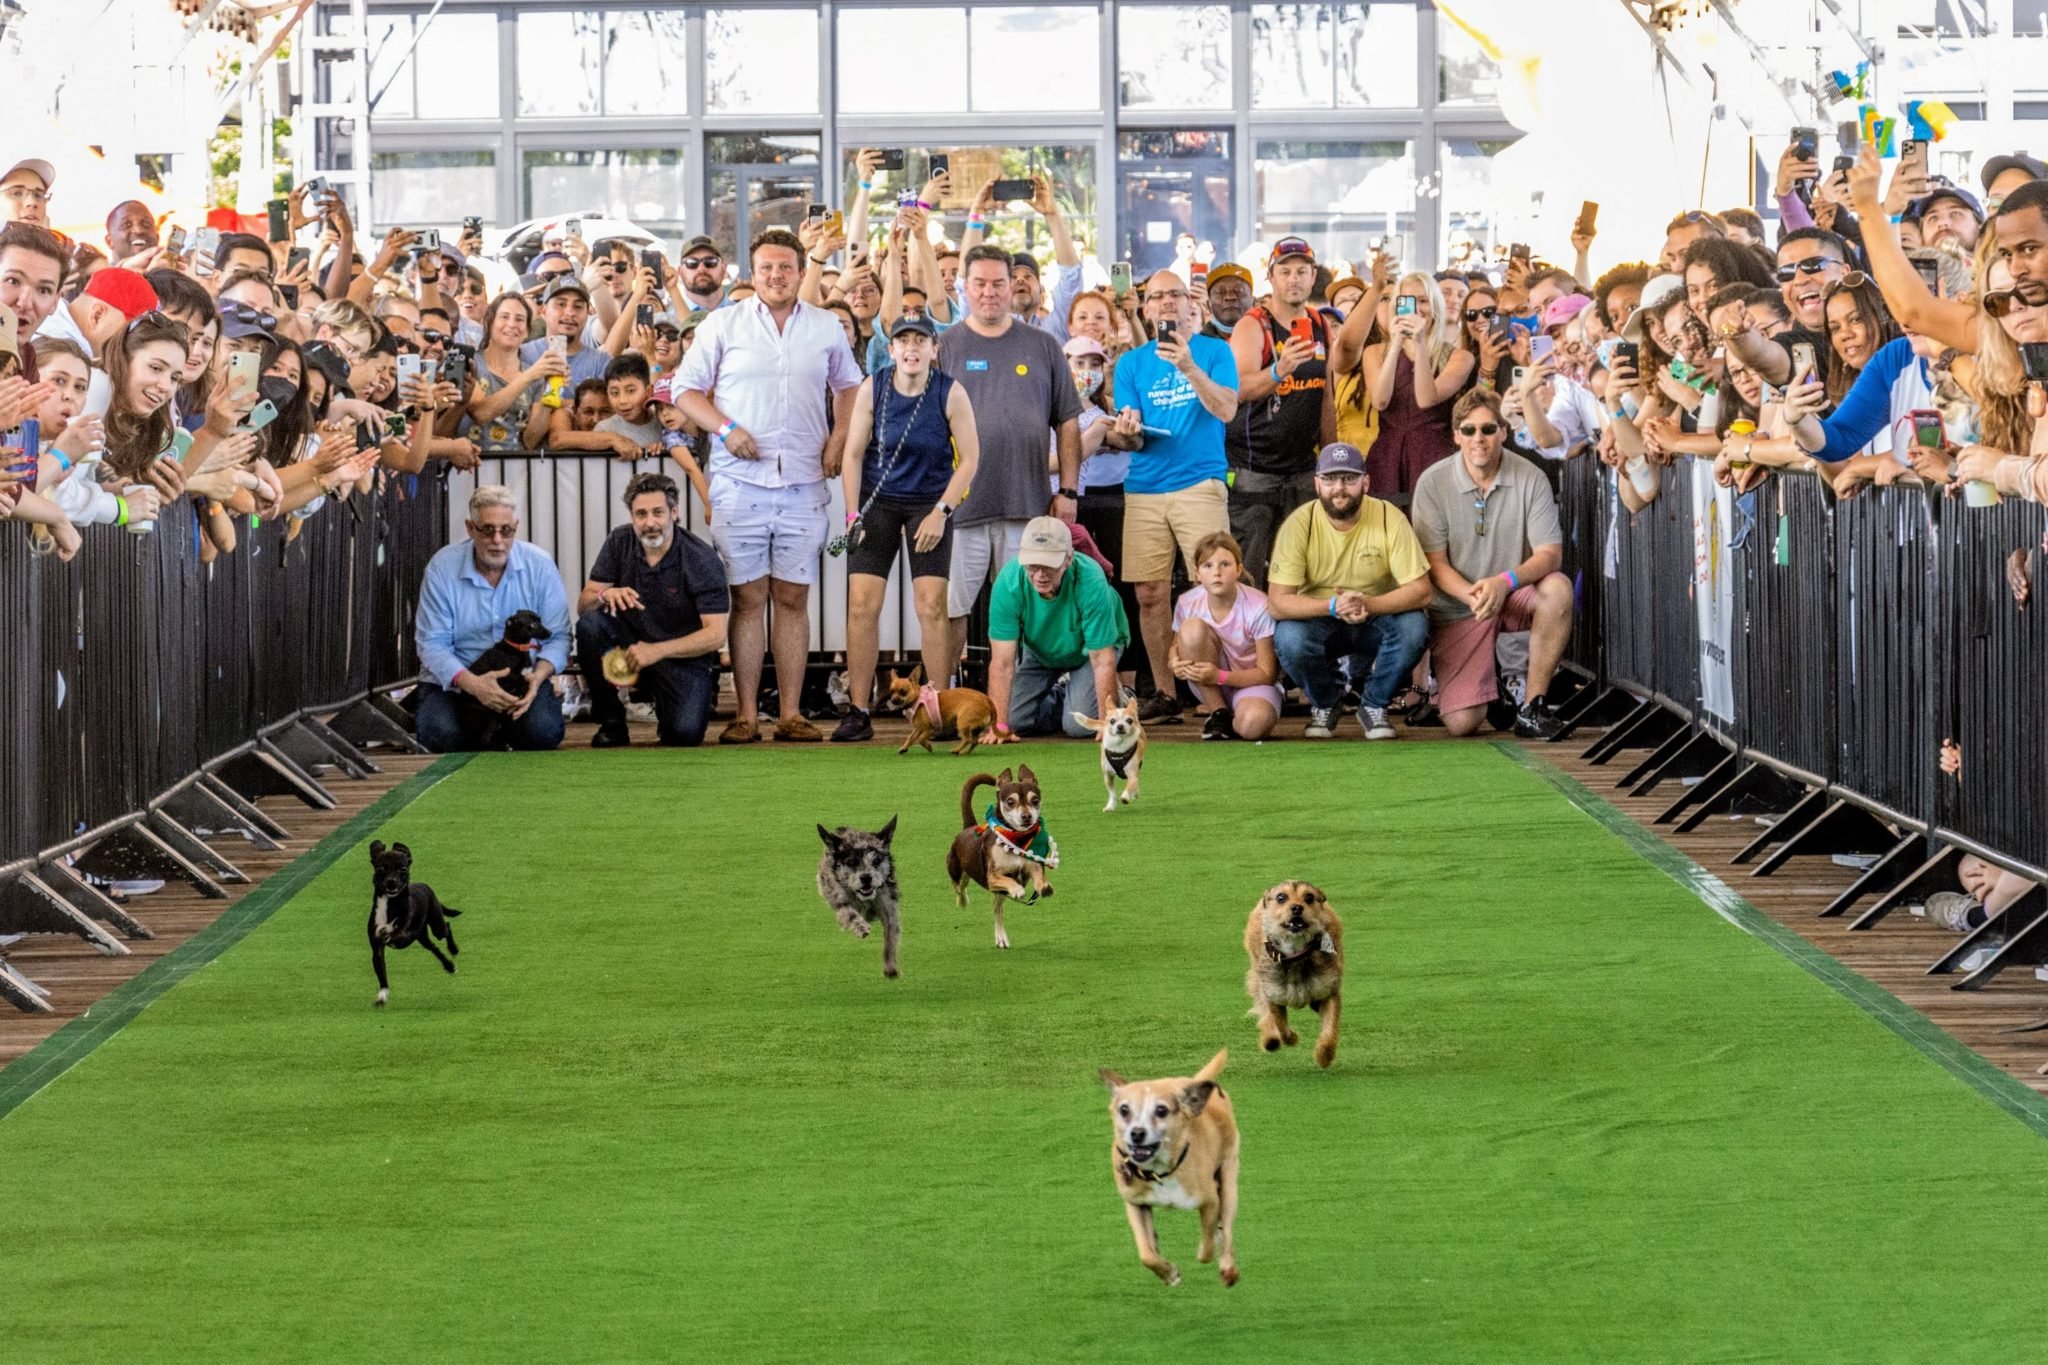 There Will Be a Massive Chihuahua Race in DC on May 6